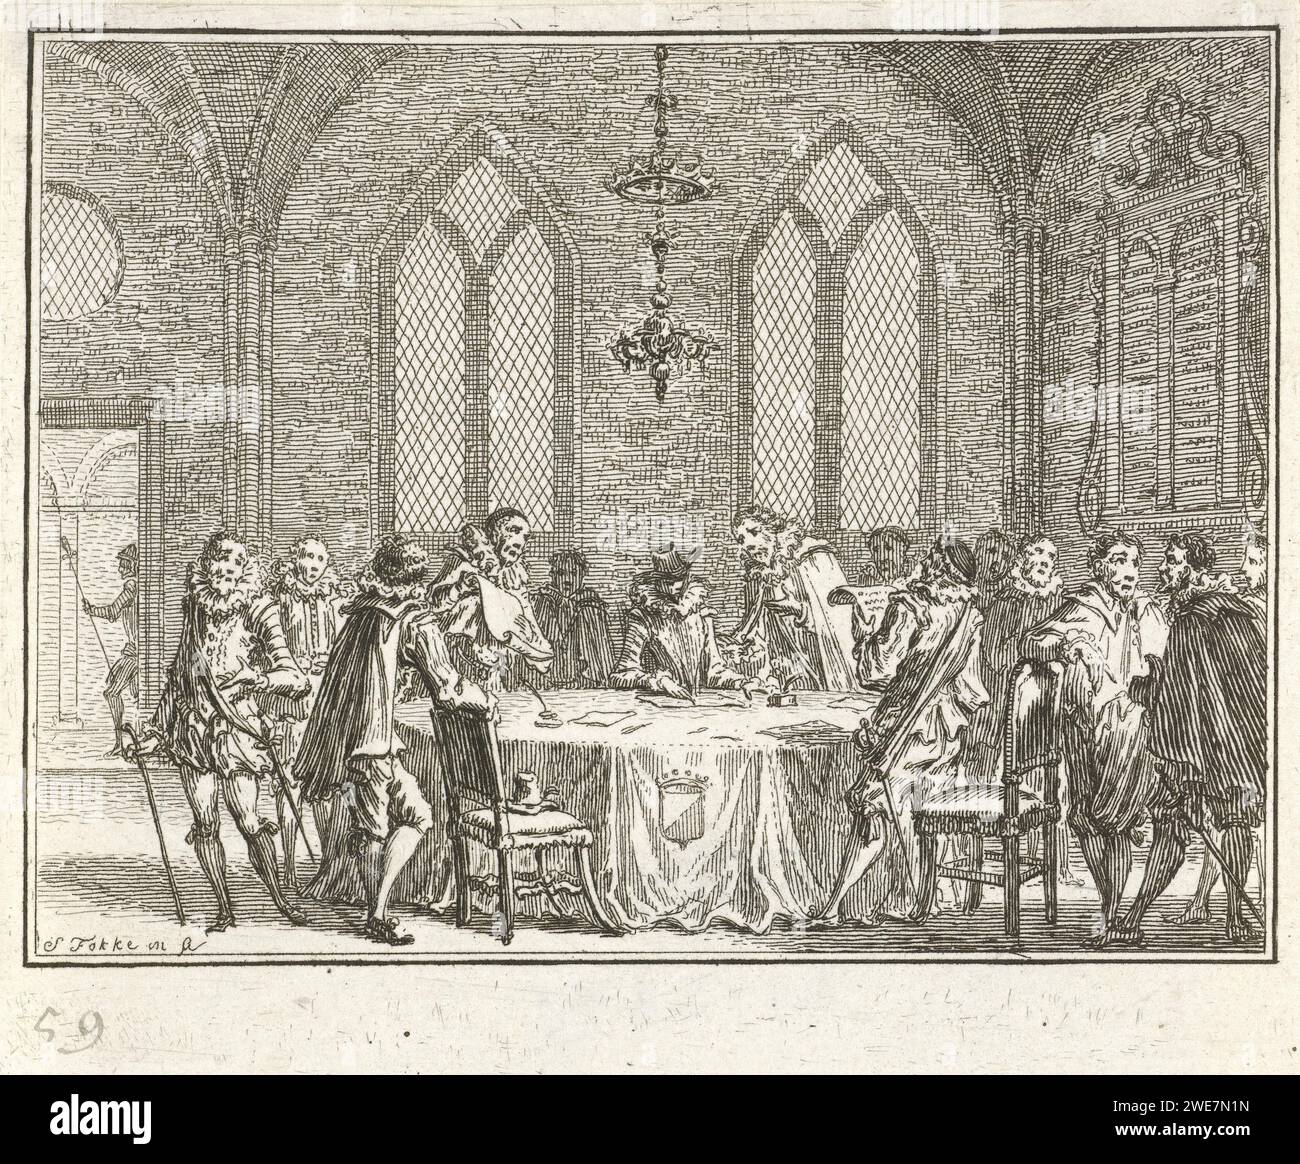 Closing the Union of Utrecht, 1579, Simon Fokke, 1782 - 1784 print Closing the Union of Utrecht. View of interior with a group of men around a table, January 23, 1579. Northern Netherlands paper etching alliance, league, union, foedus Stock Photo